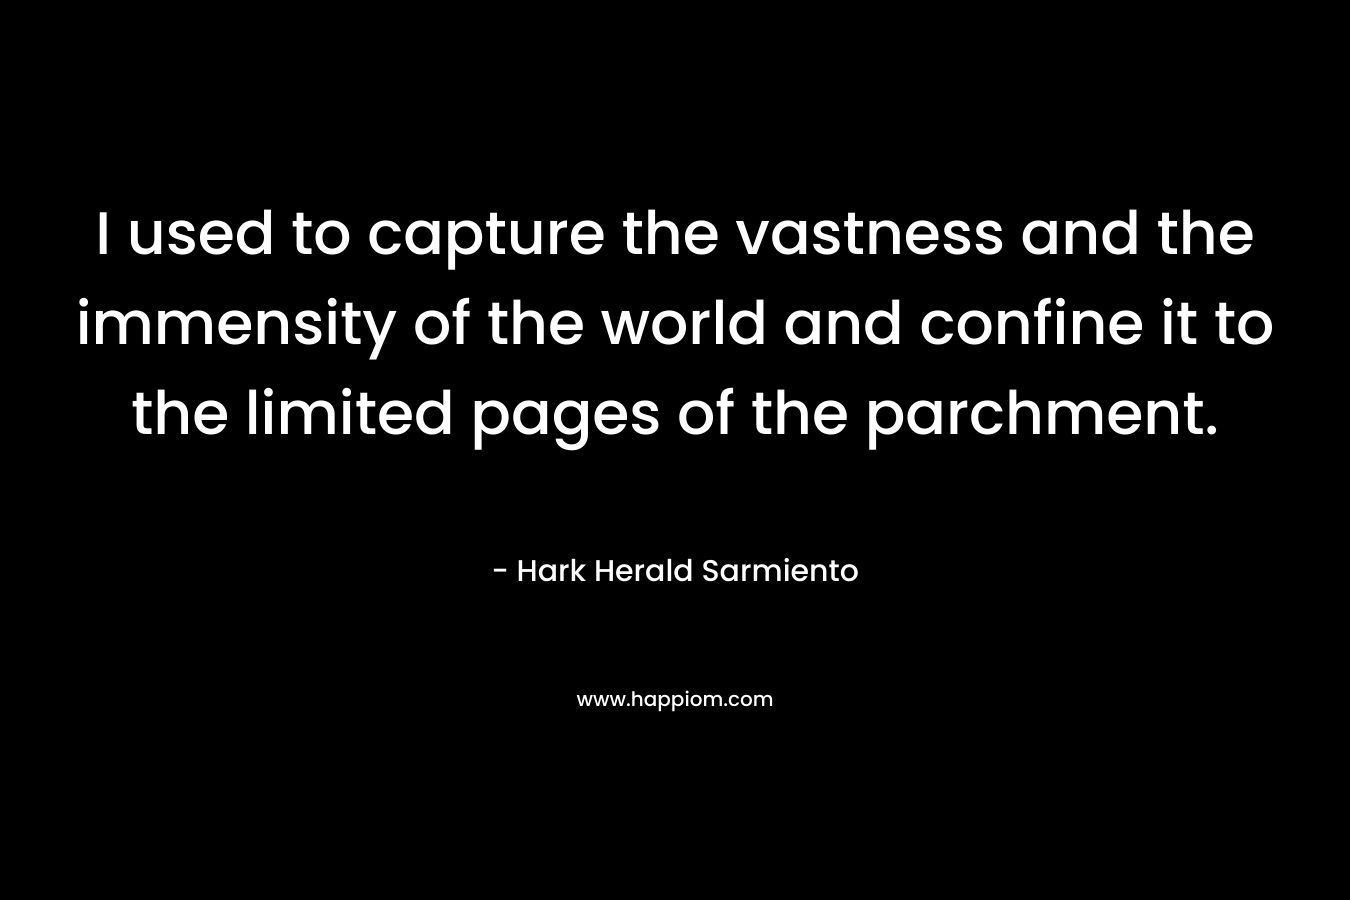 I used to capture the vastness and the immensity of the world and confine it to the limited pages of the parchment. – Hark Herald Sarmiento